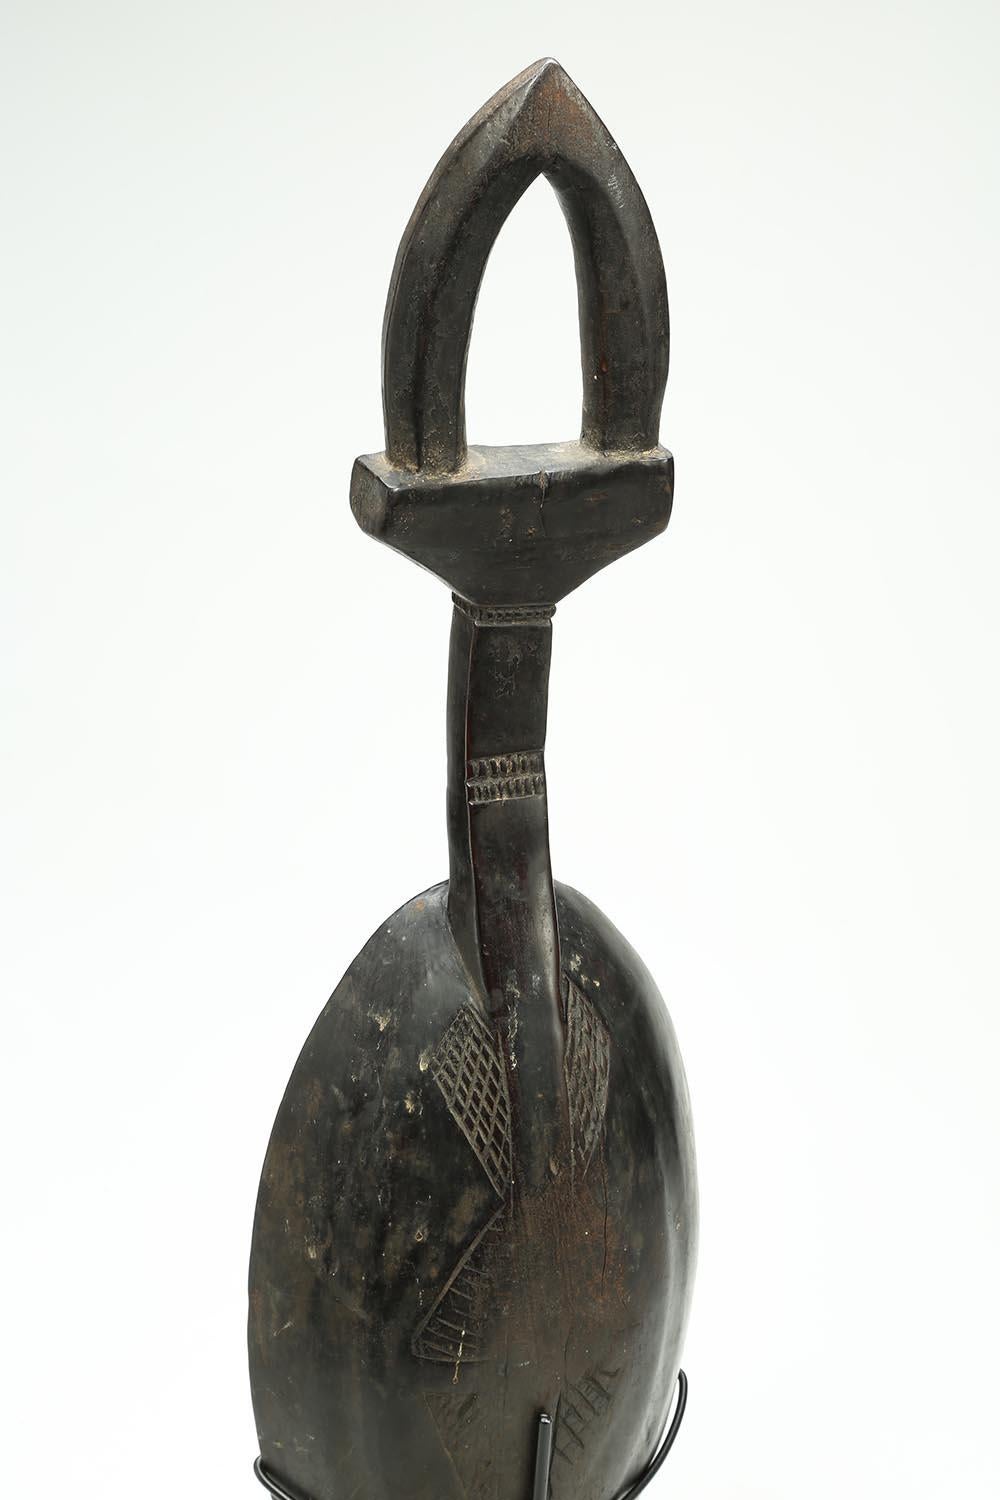 Dan tribal ritual rice serving spoon, stylized antelope handle, incised design, ivory coast, Africa

An early carved wood serving spoon from the Dan people with wonderful patina from wear and handling. Abstract Antelope horn shaped handle. Early